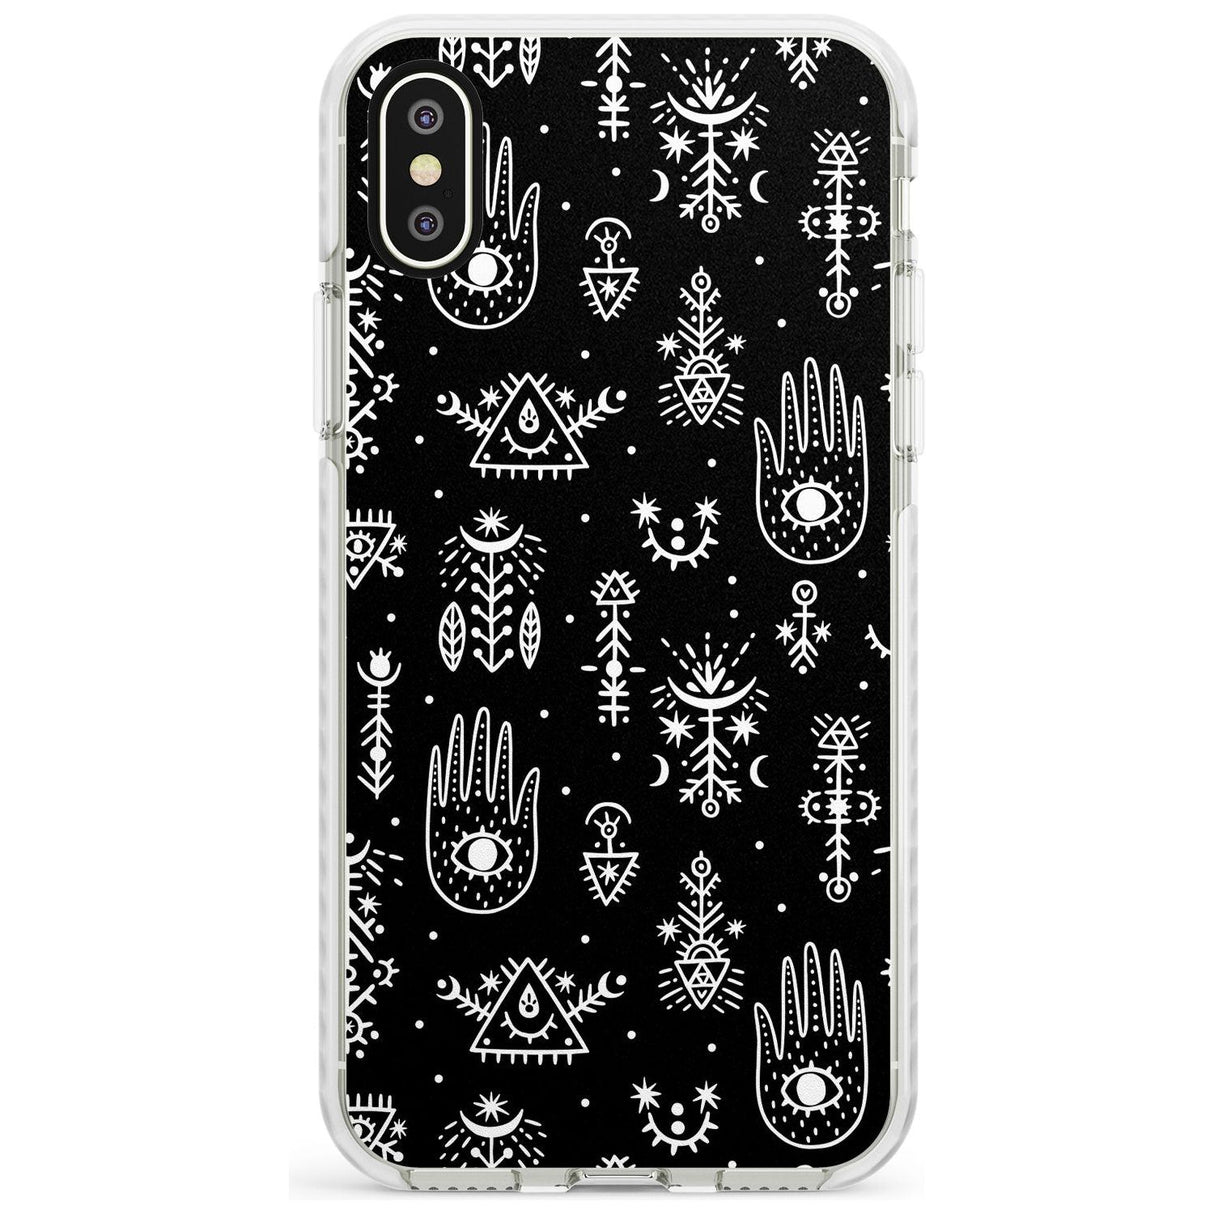 Tribal Palms - White on Black Impact Phone Case for iPhone X XS Max XR